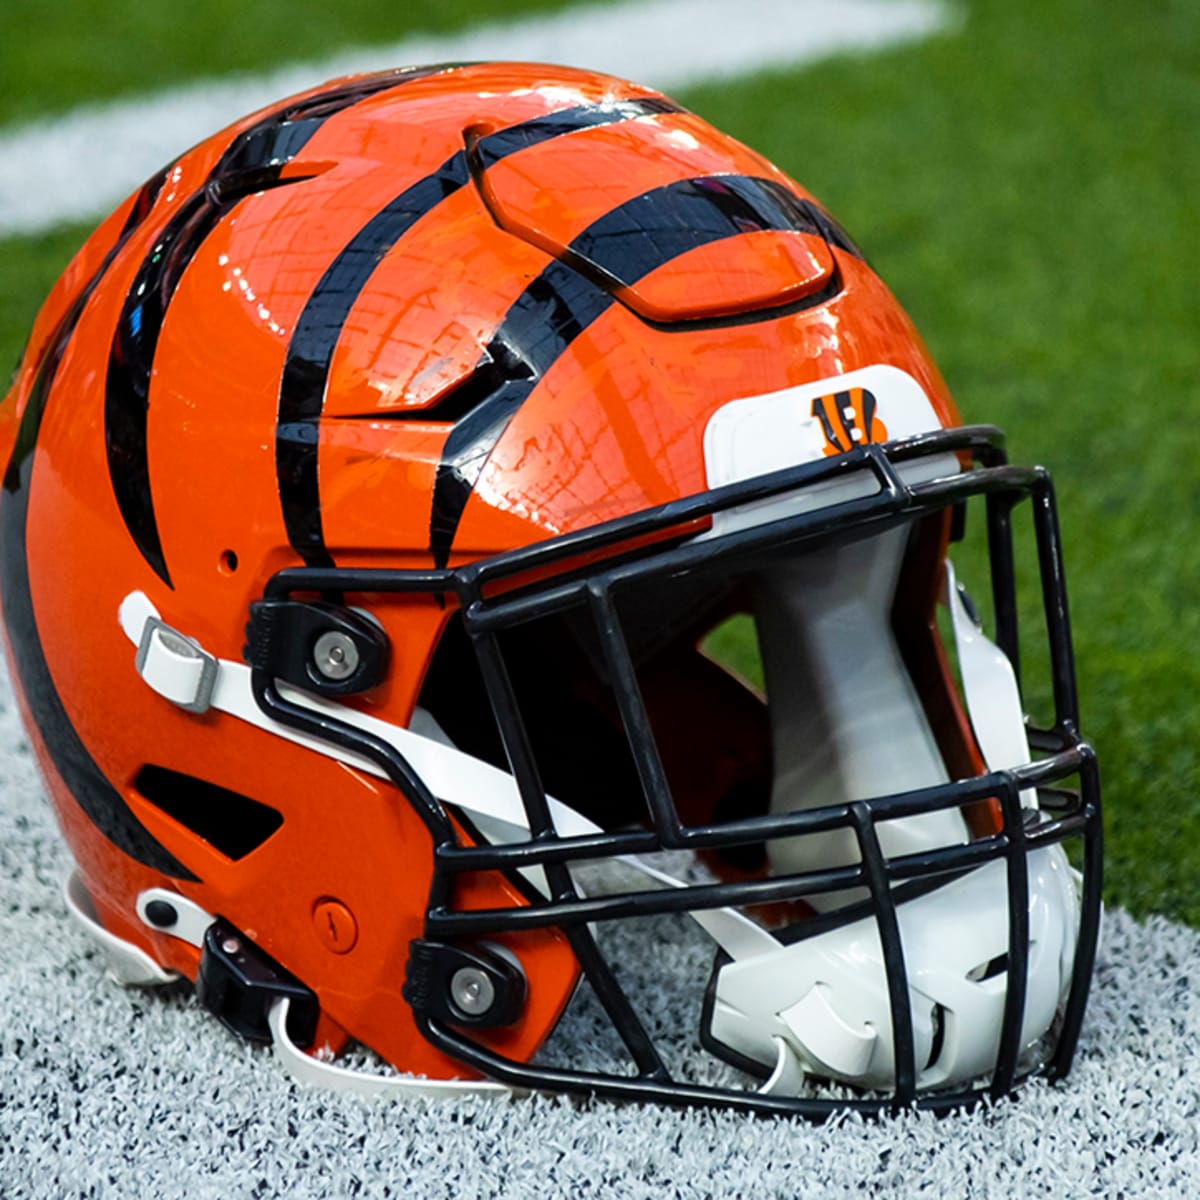 Bengals select Cordell Volson with No. 136 pick in 2022 draft